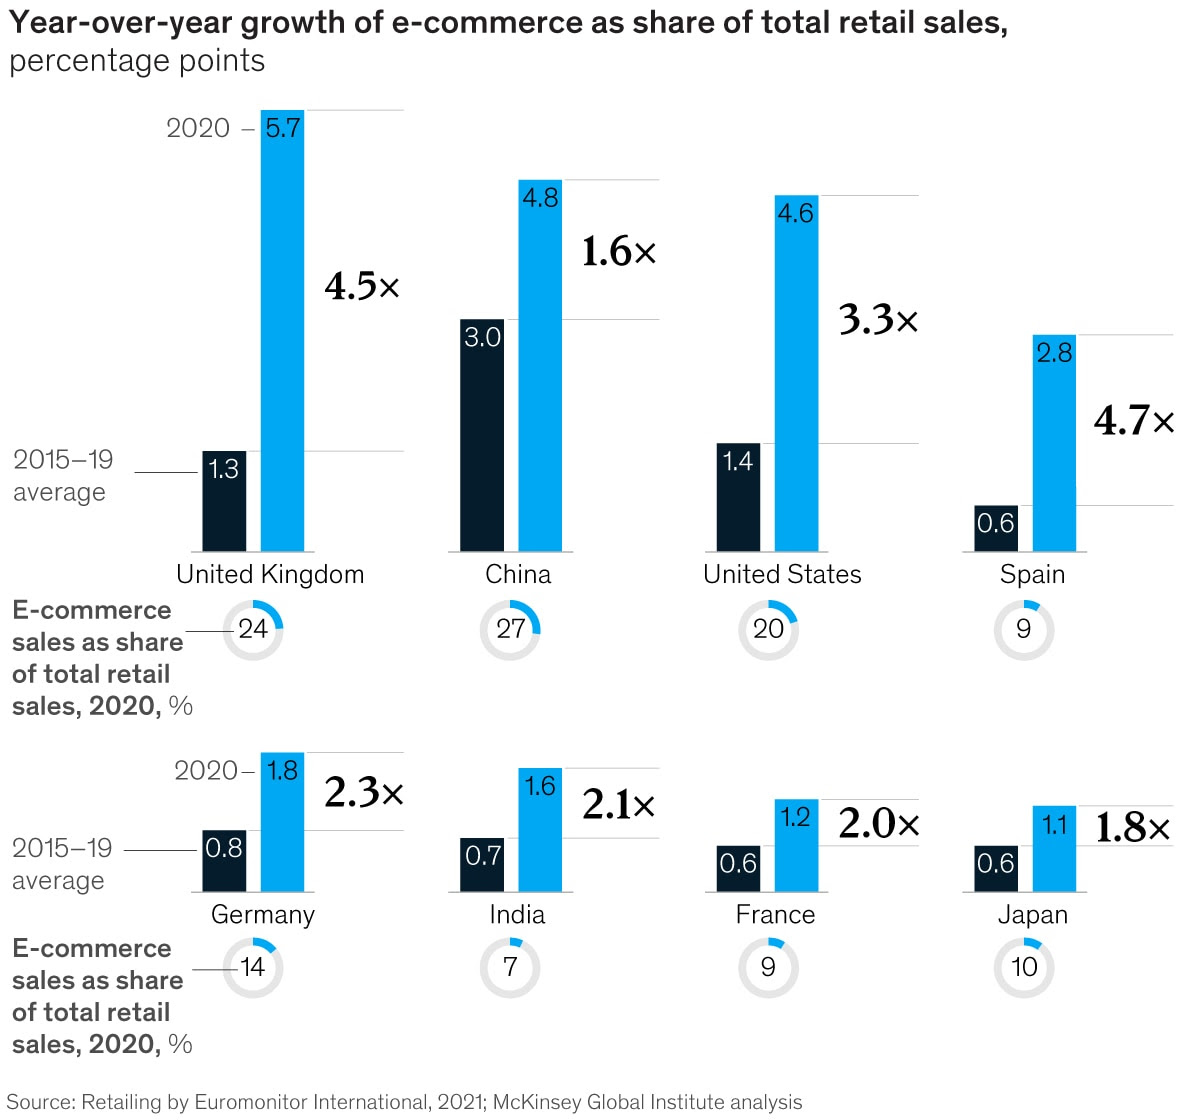 Year-over-year growth of e-commerce as sharet of total retail sales, percentage points exhibit